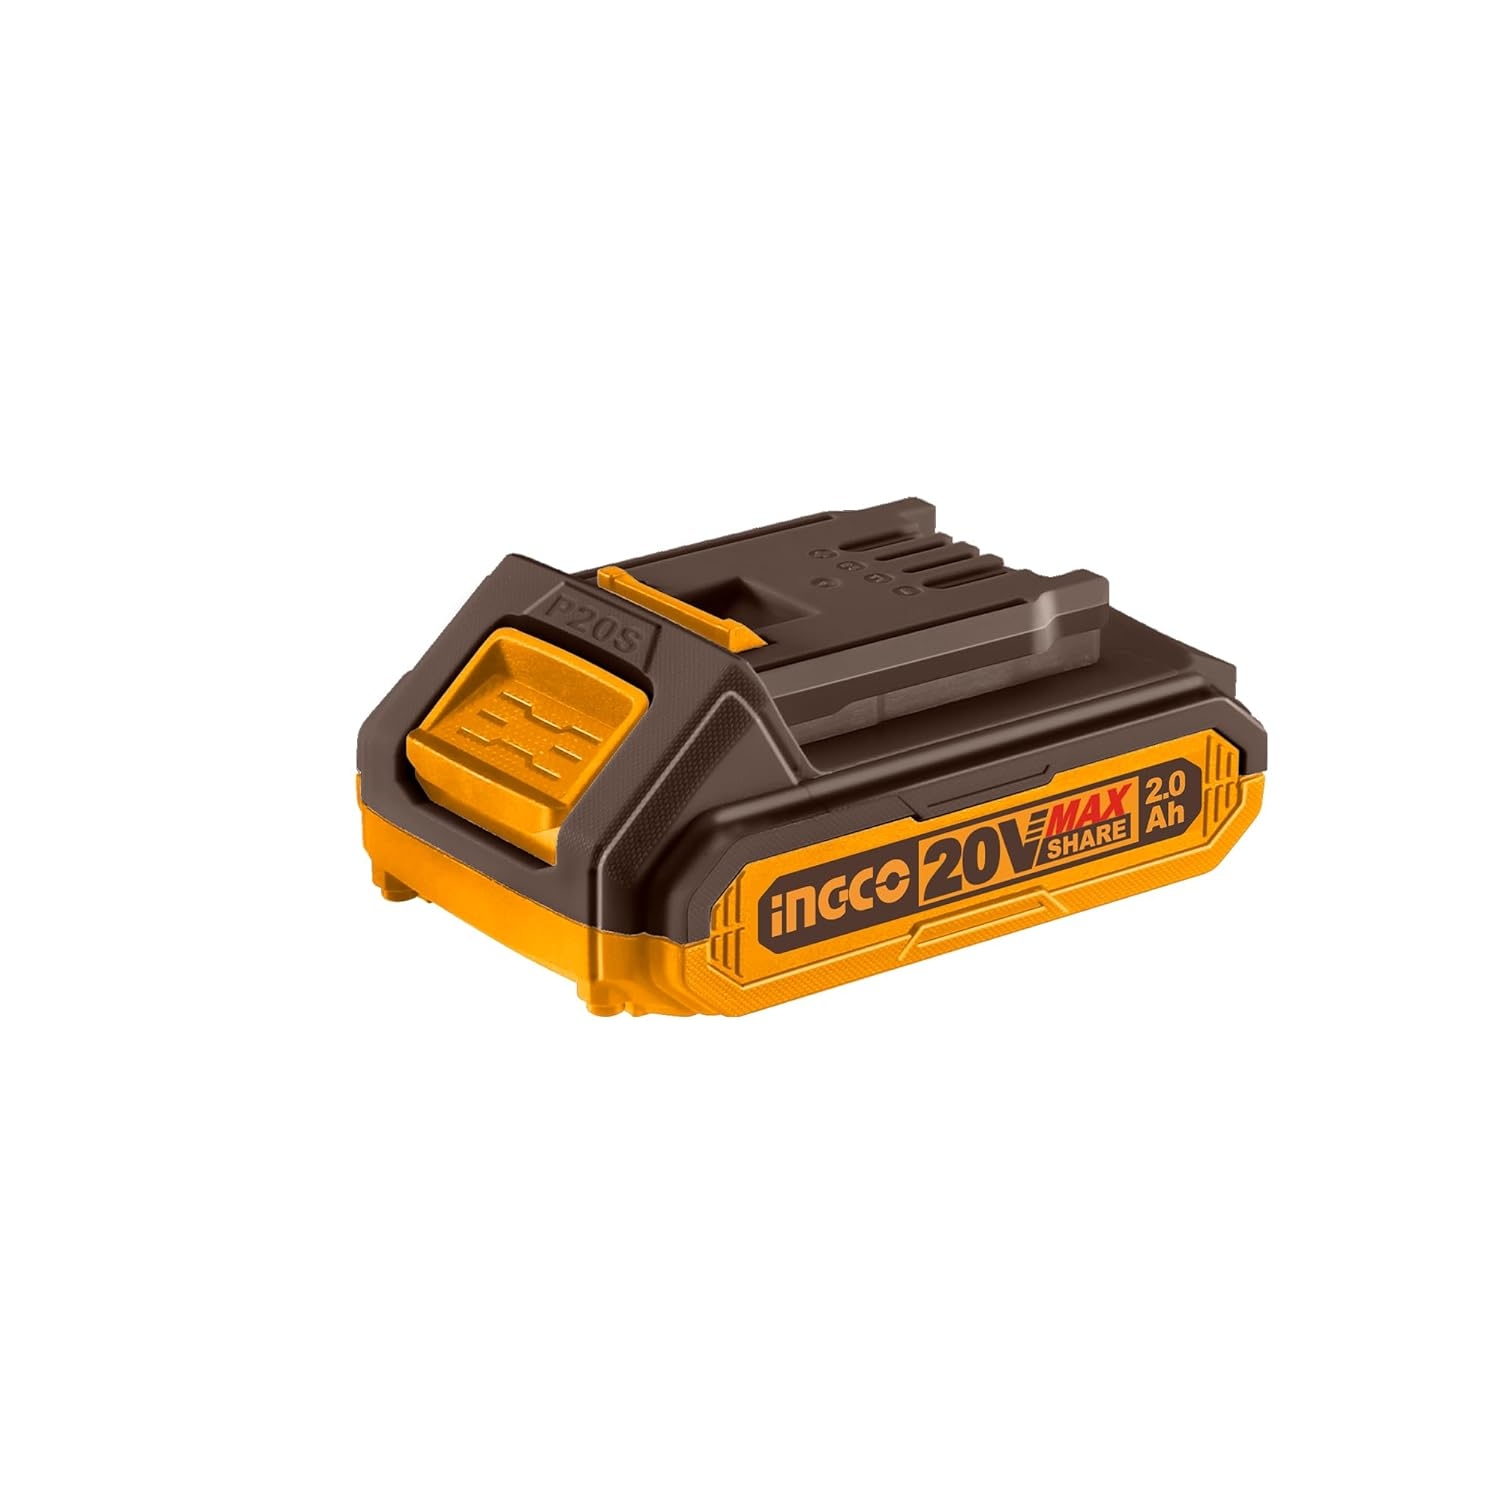 INGCO 20V Batteries, 2.0Ah Battery | All INGCO 20V Power Tools, LED Battery Power Indicator General Purpose Batteries & Battery Chargers